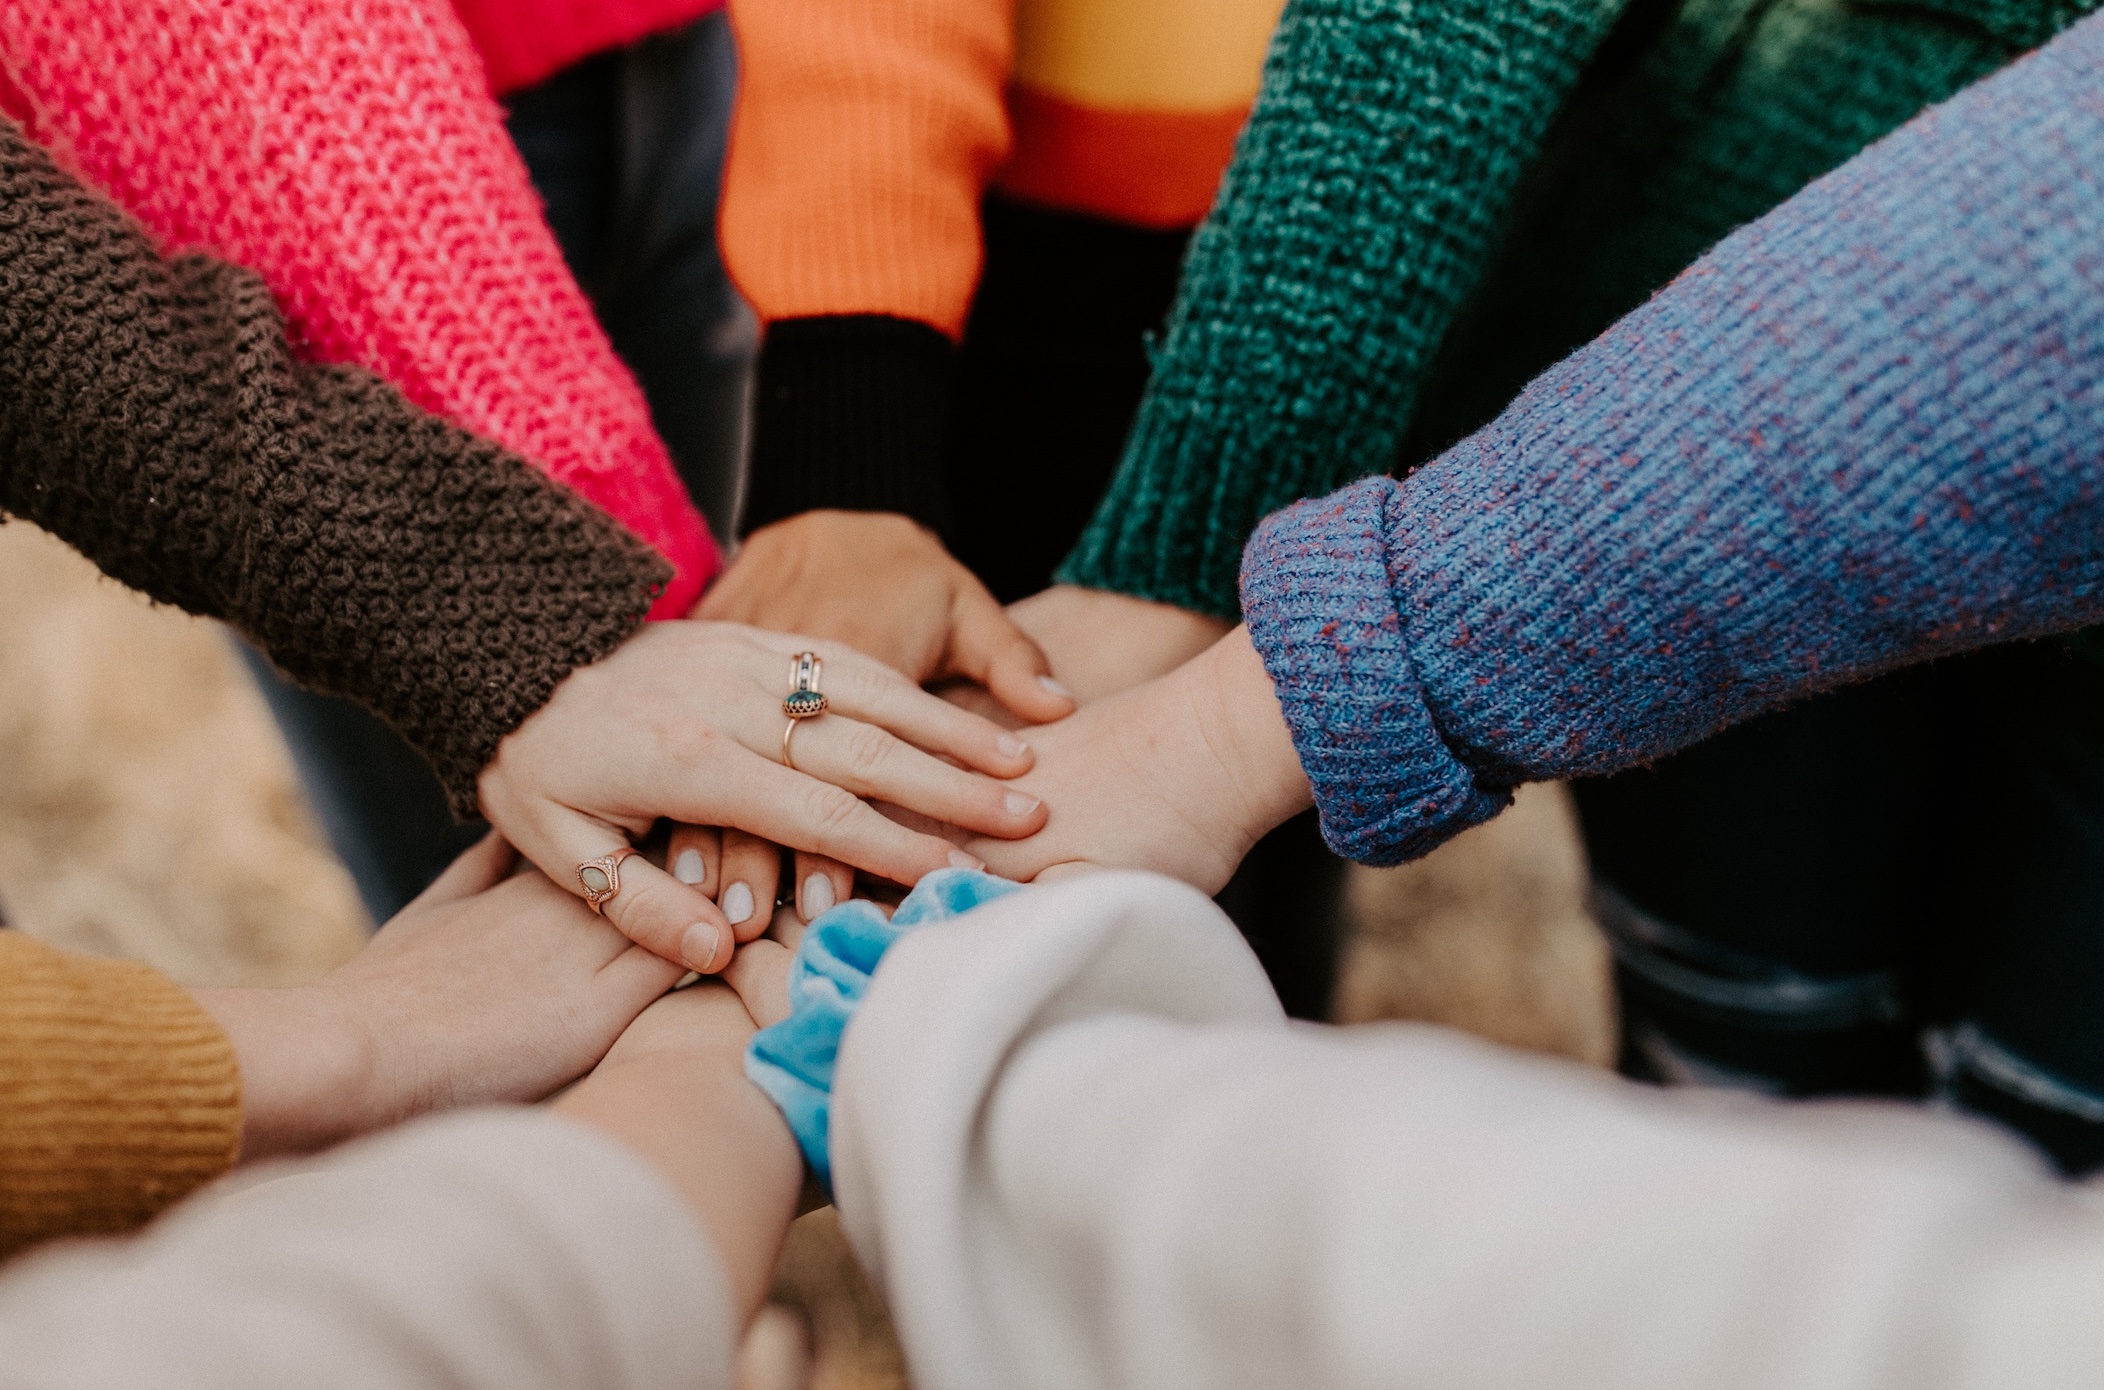 Group of women putting hands in a circle; image by Hannah Busing, via Unsplash.com.